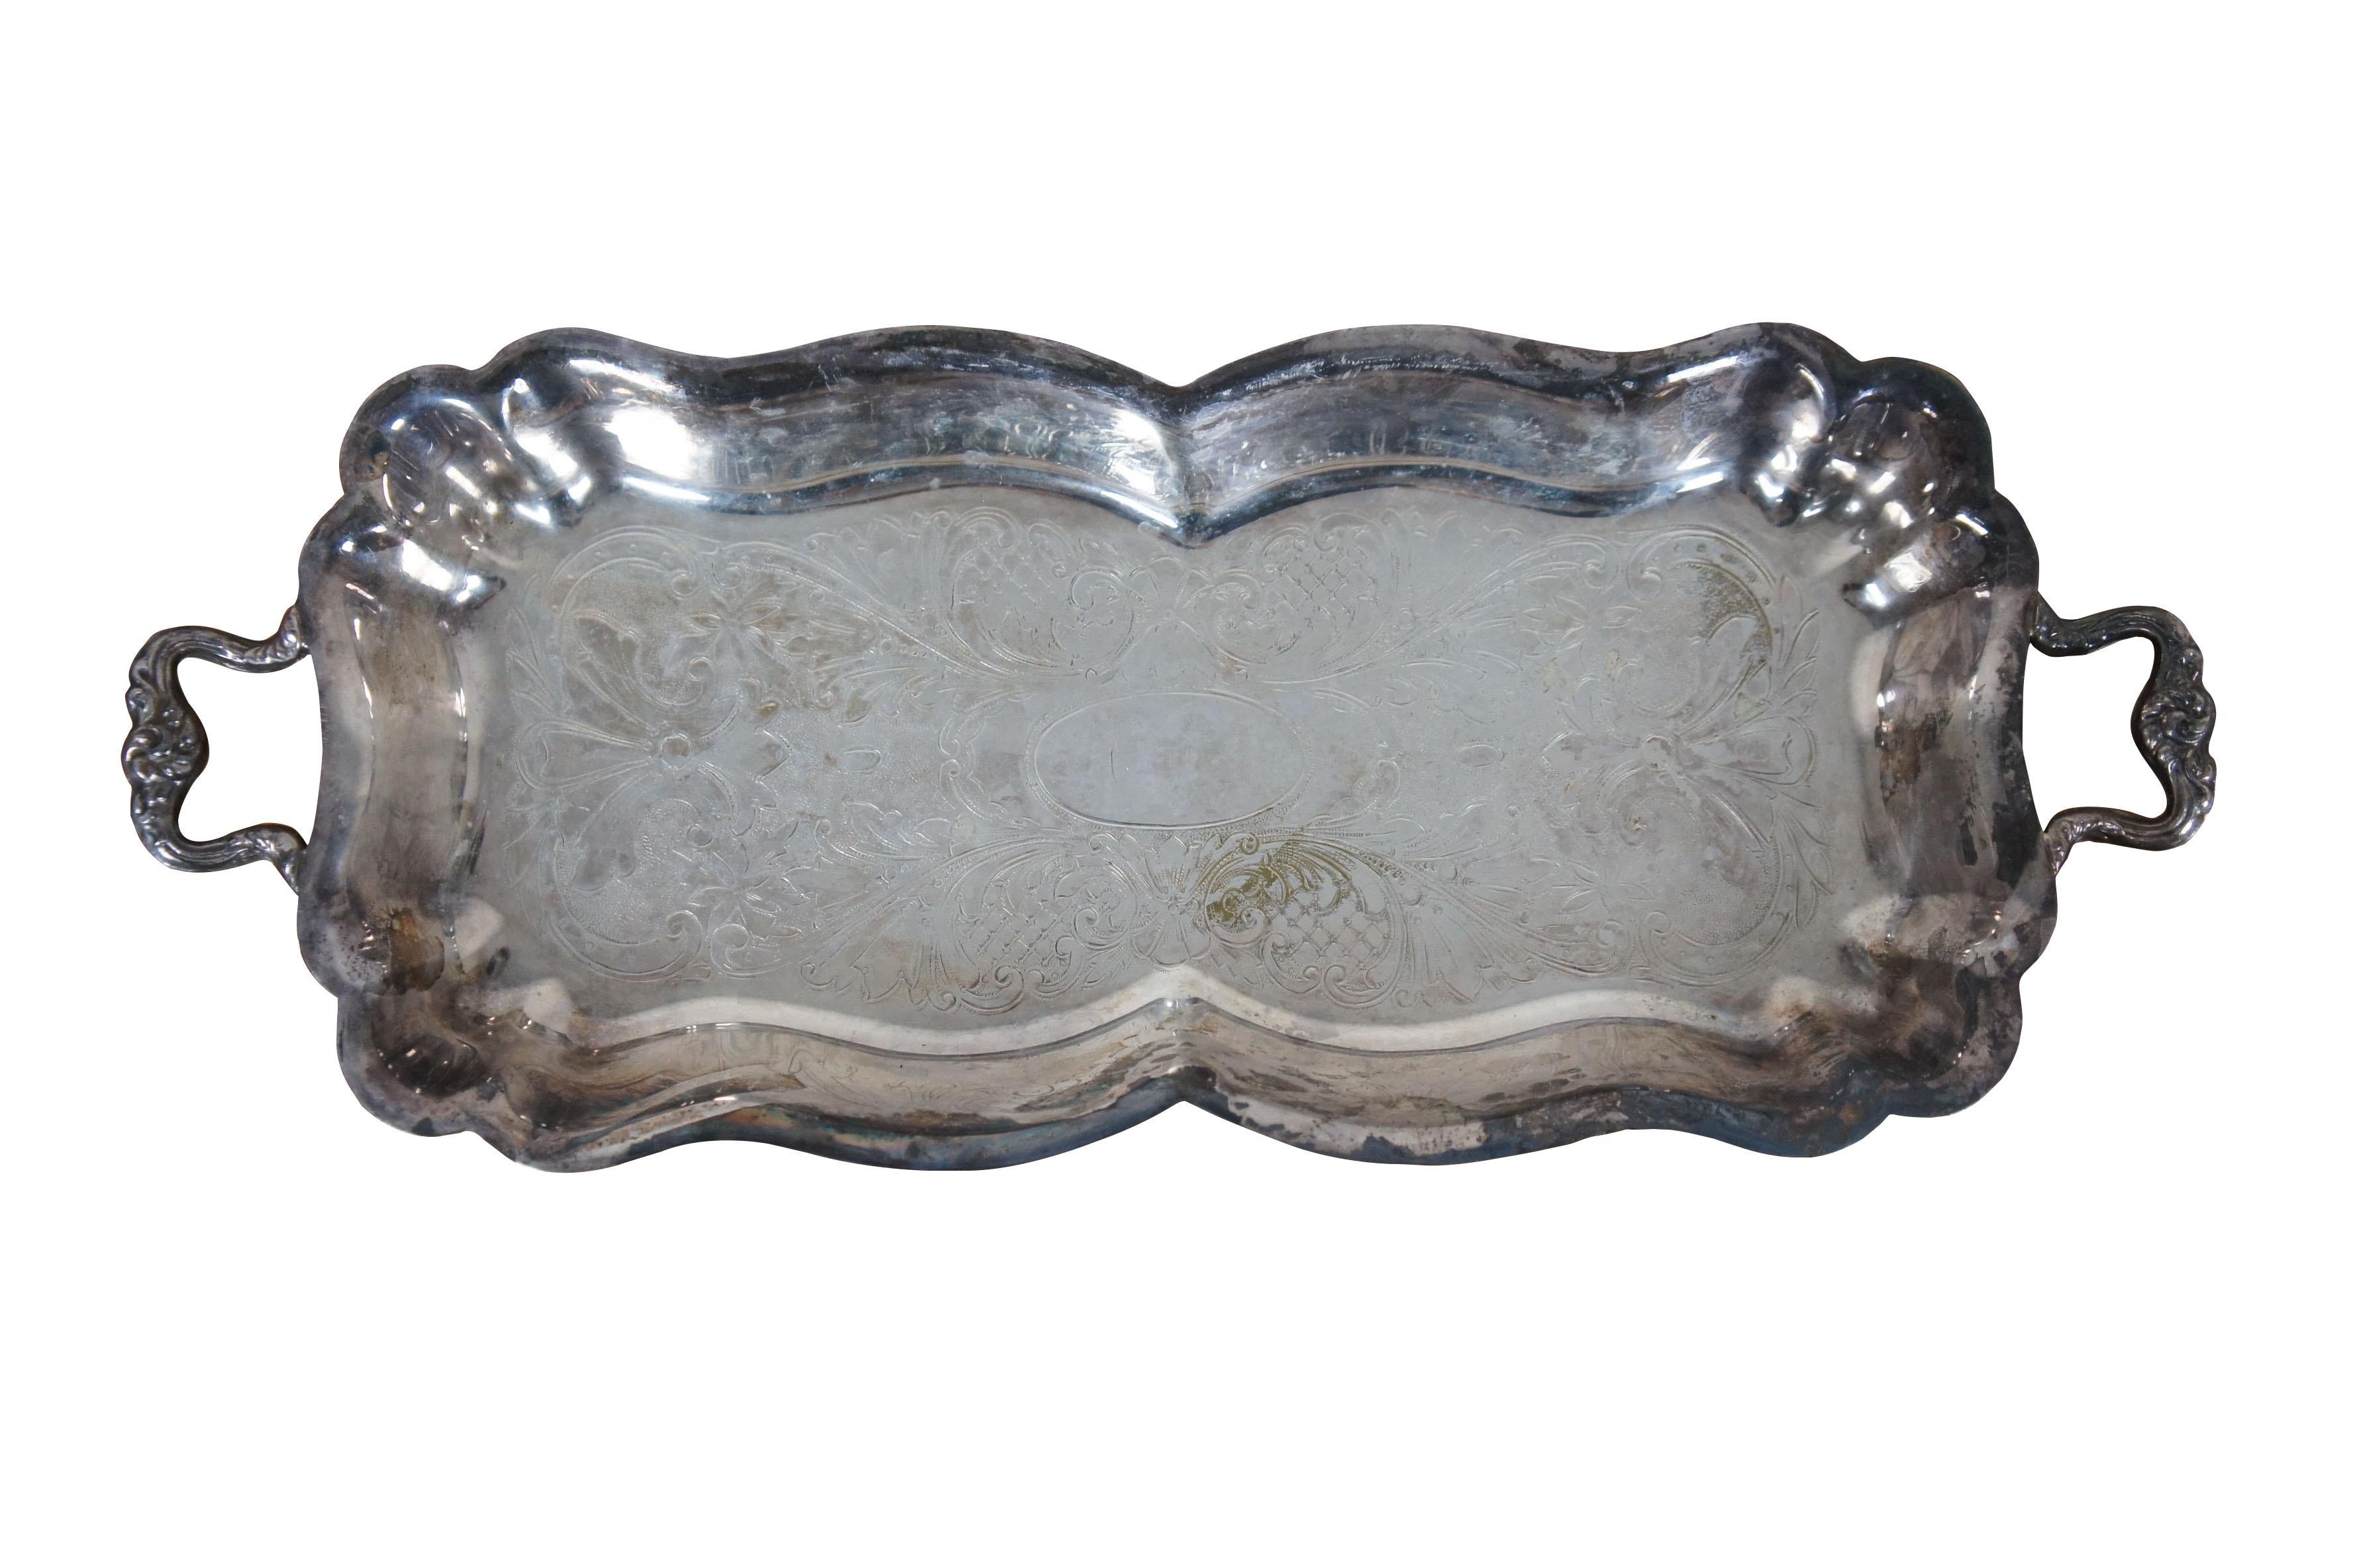 Mid 20th century relish dish / small serving tray by Sheridan Silver Co and cake server by the National Silver Company. Tray features footed base, scalloped edges and etched scallops and florals on body and handles. Cake server features a pierced